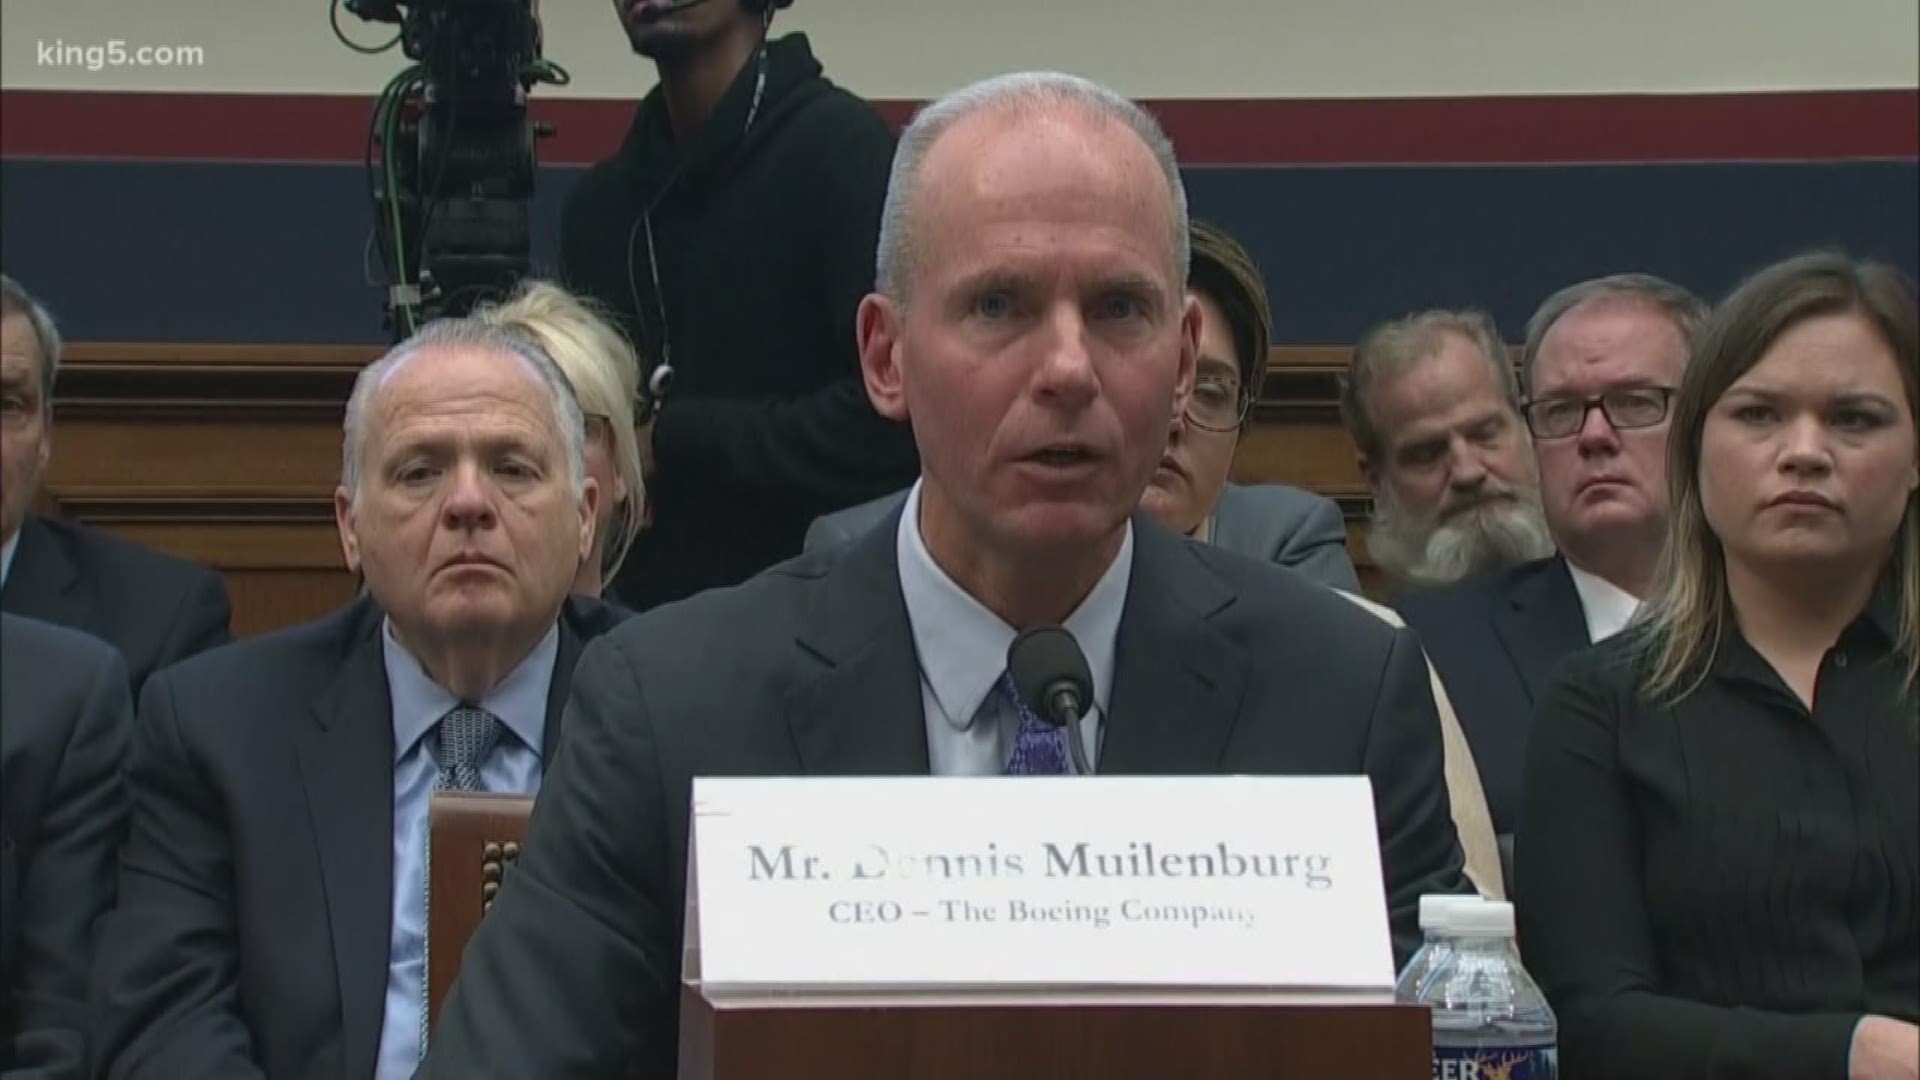 Boeing CEO Dennis Muilenburg faced withering questions from senators Tuesday about two crashes of 737 Max jets and whether the company concealed information.